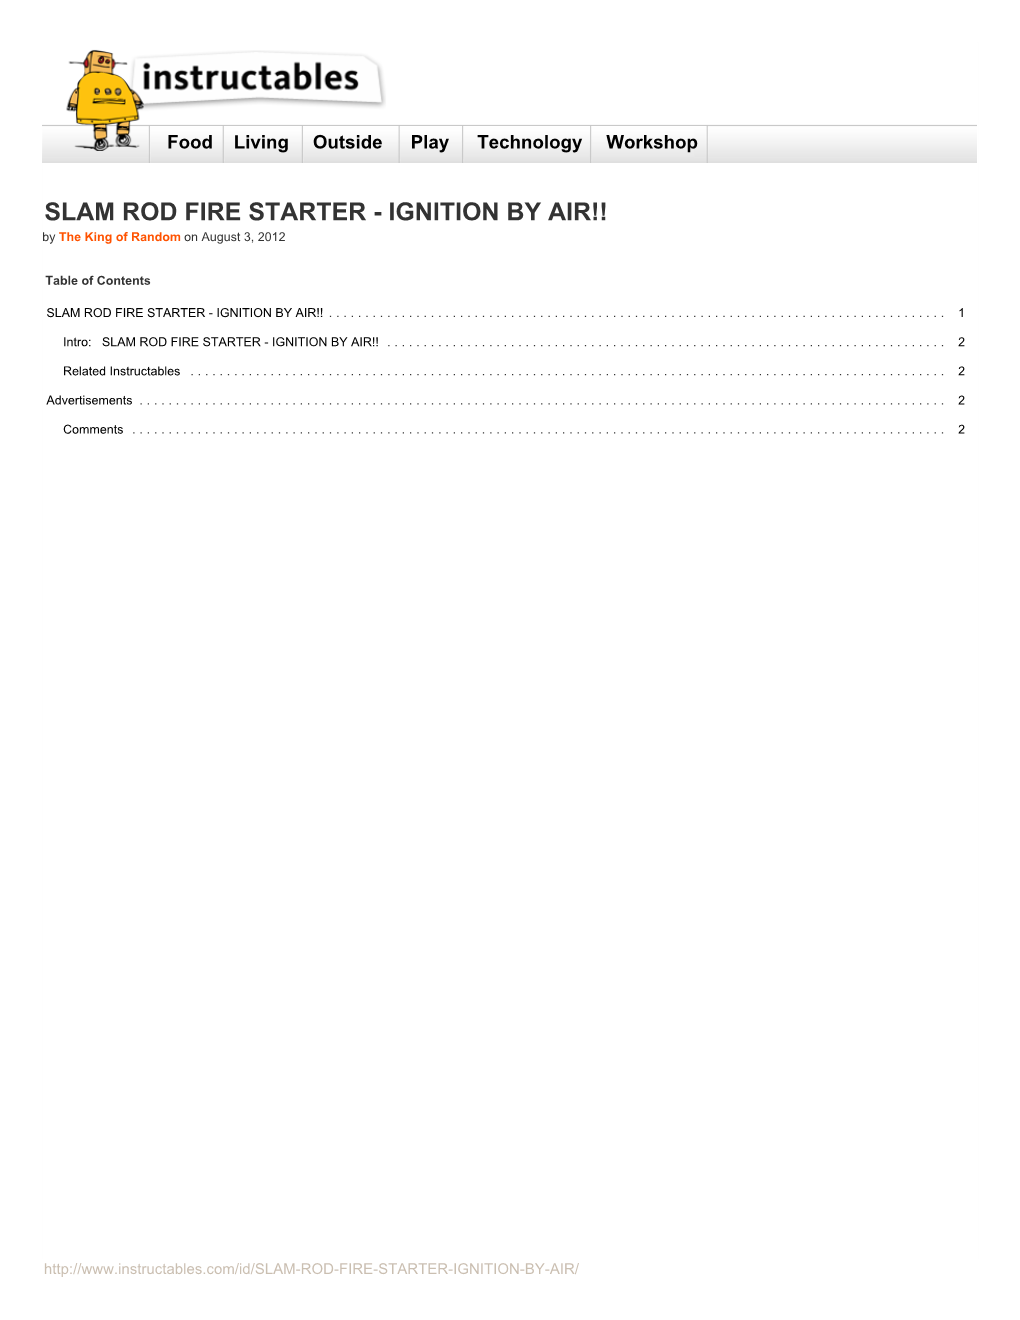 SLAM ROD FIRE STARTER - IGNITION by AIR!! by the King of Random on August 3, 2012